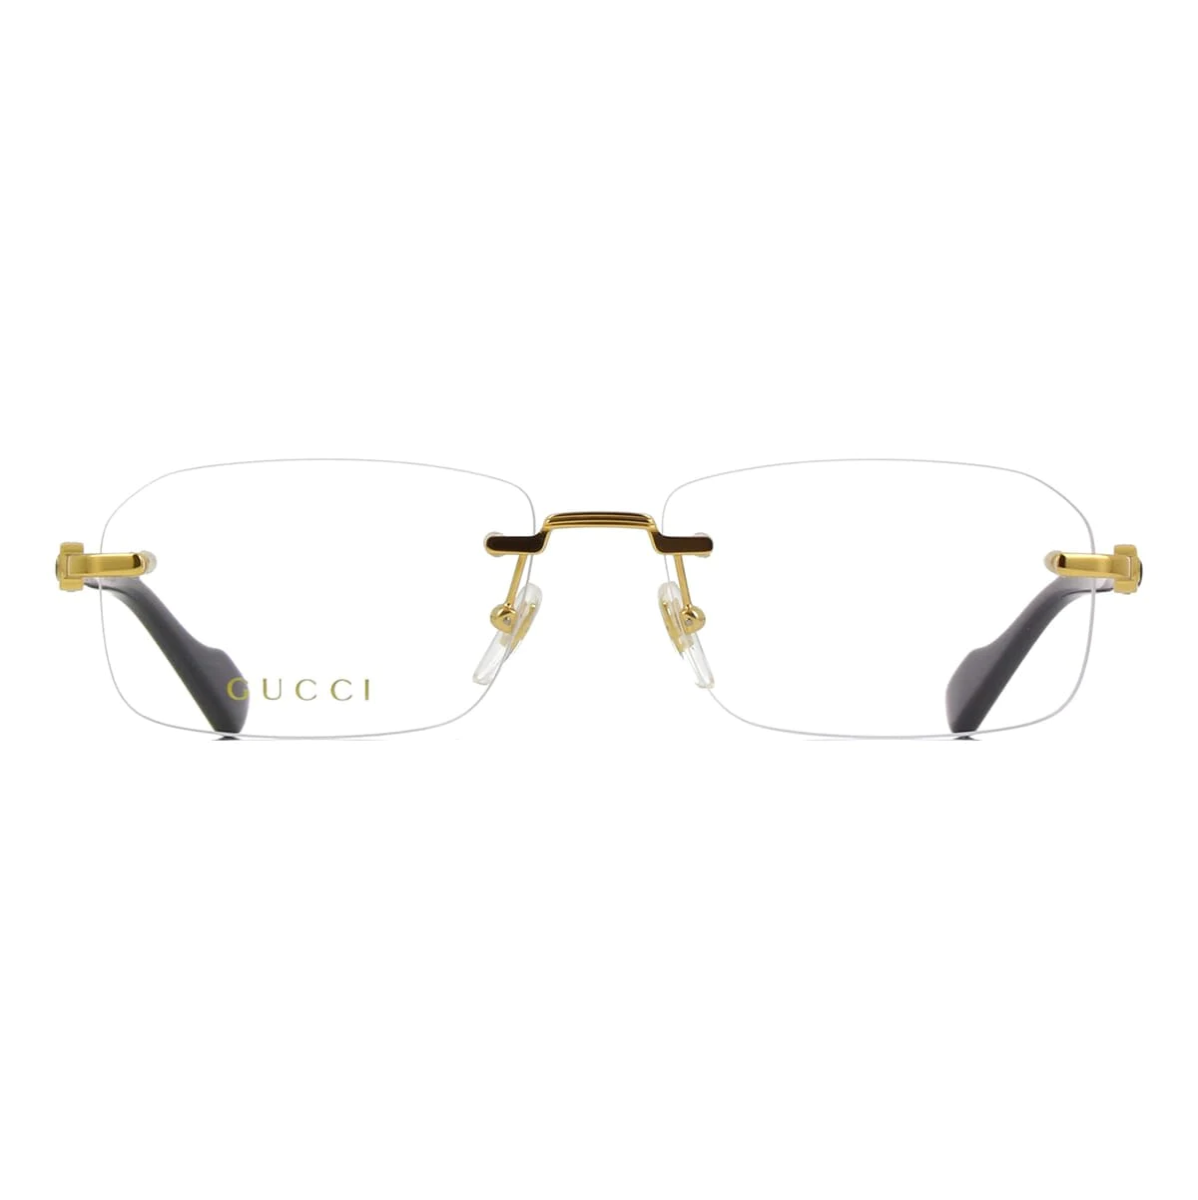  "Premium Gucci 1221O Frame - Unisex spectacles for men and women at Optorium."